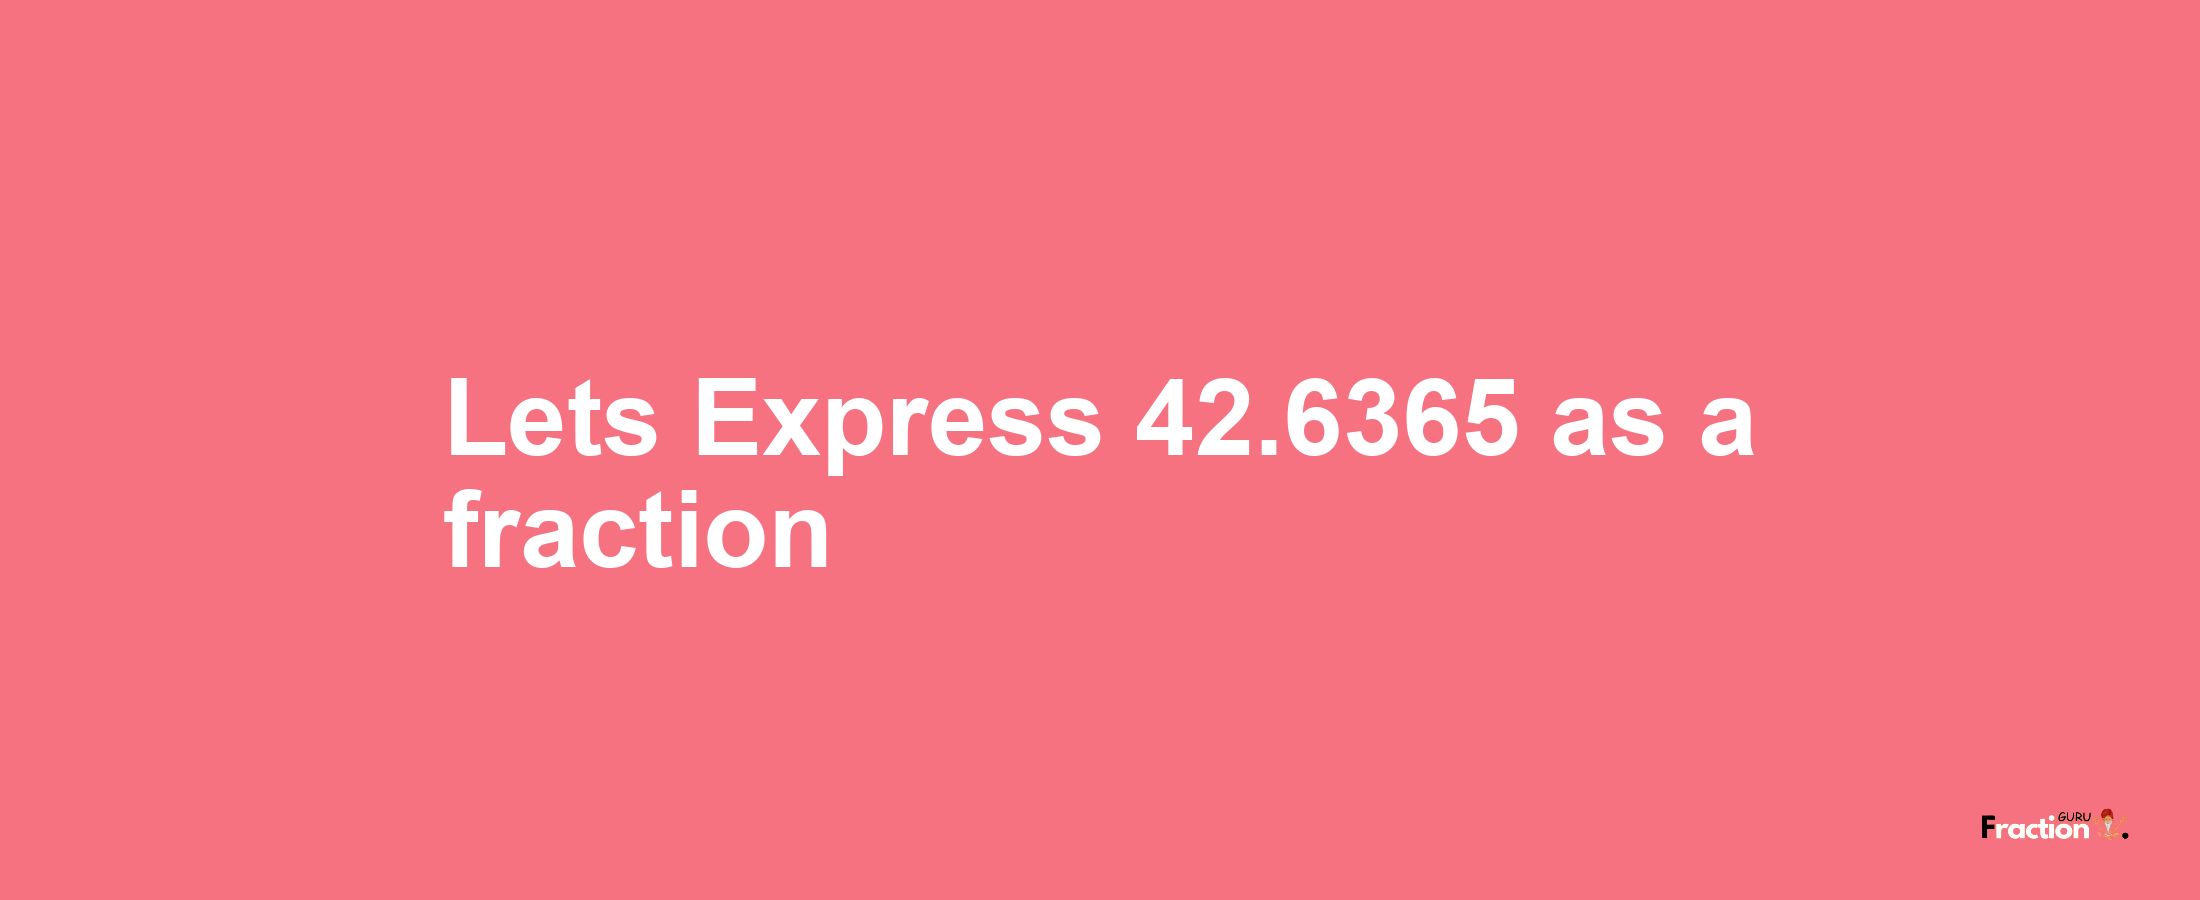 Lets Express 42.6365 as afraction